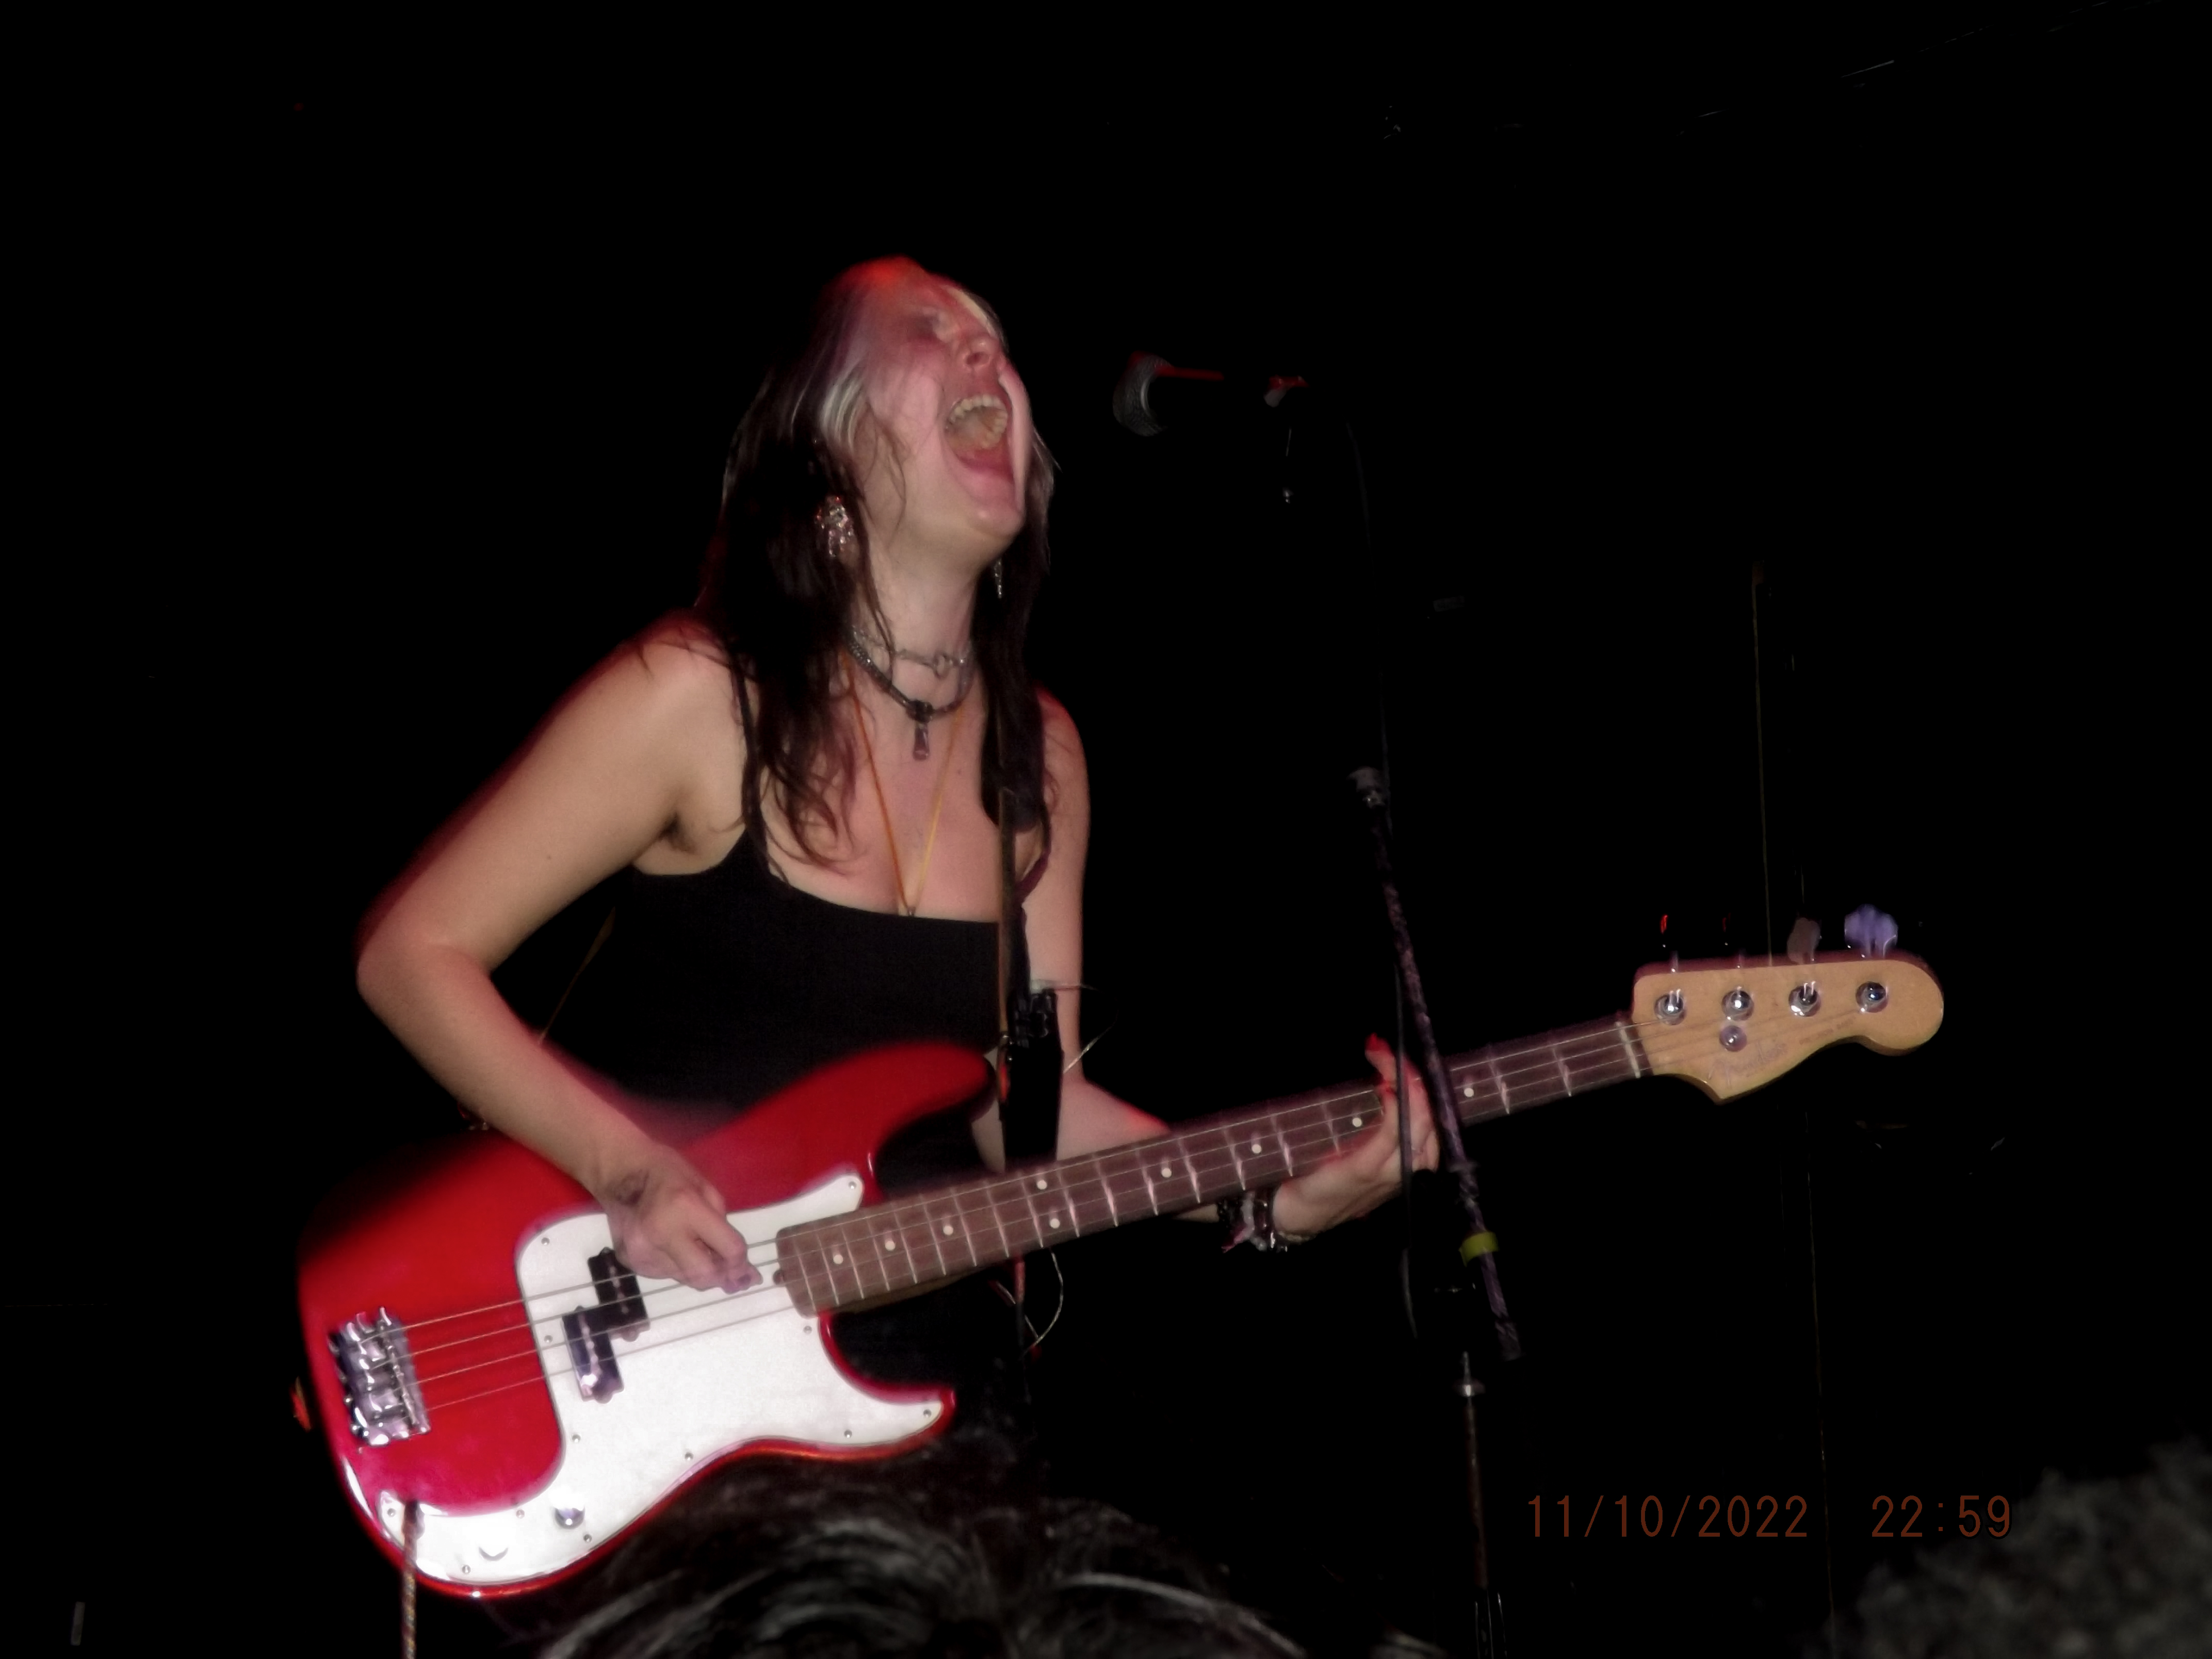 Sabrina Fuentes of Pretty Sick on a red bass guitar.